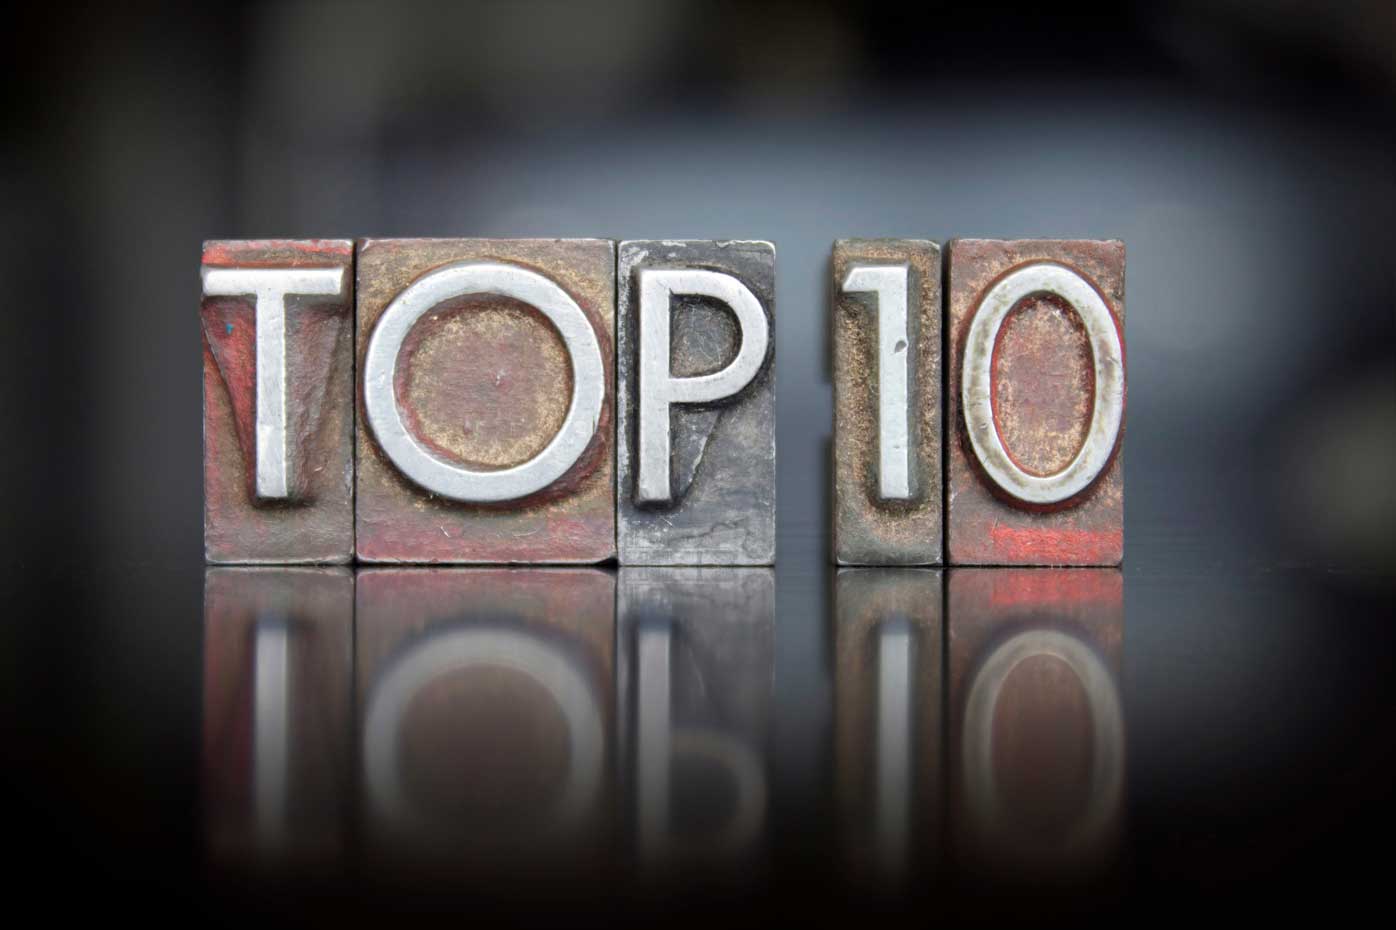 Top 10 stamped graphic